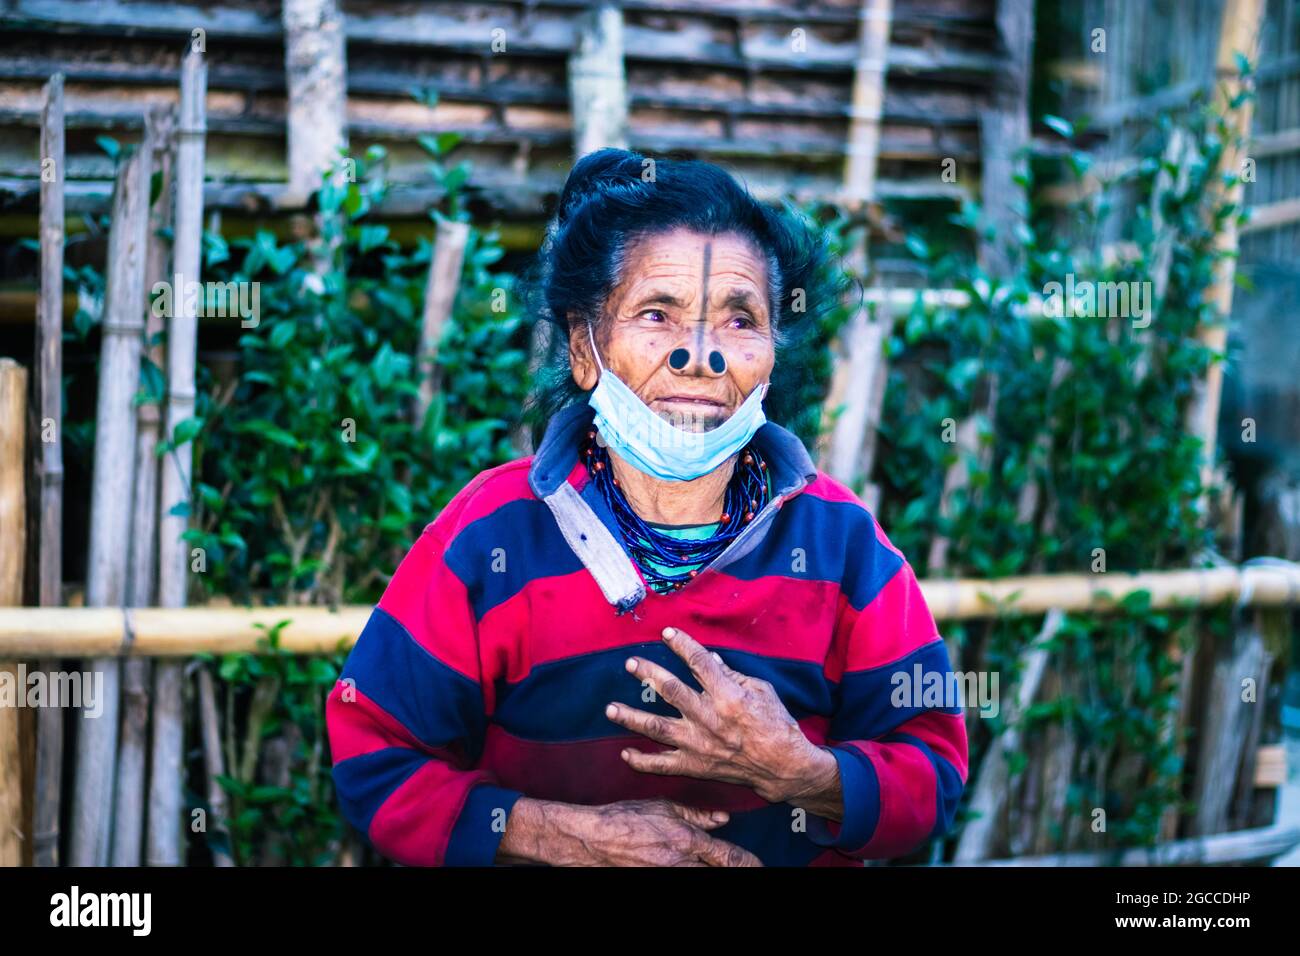 apatani tribal women facial expression with her traditional nose lobes and blurred background image is taken at ziro arunachal pradesh india. it is on Stock Photo